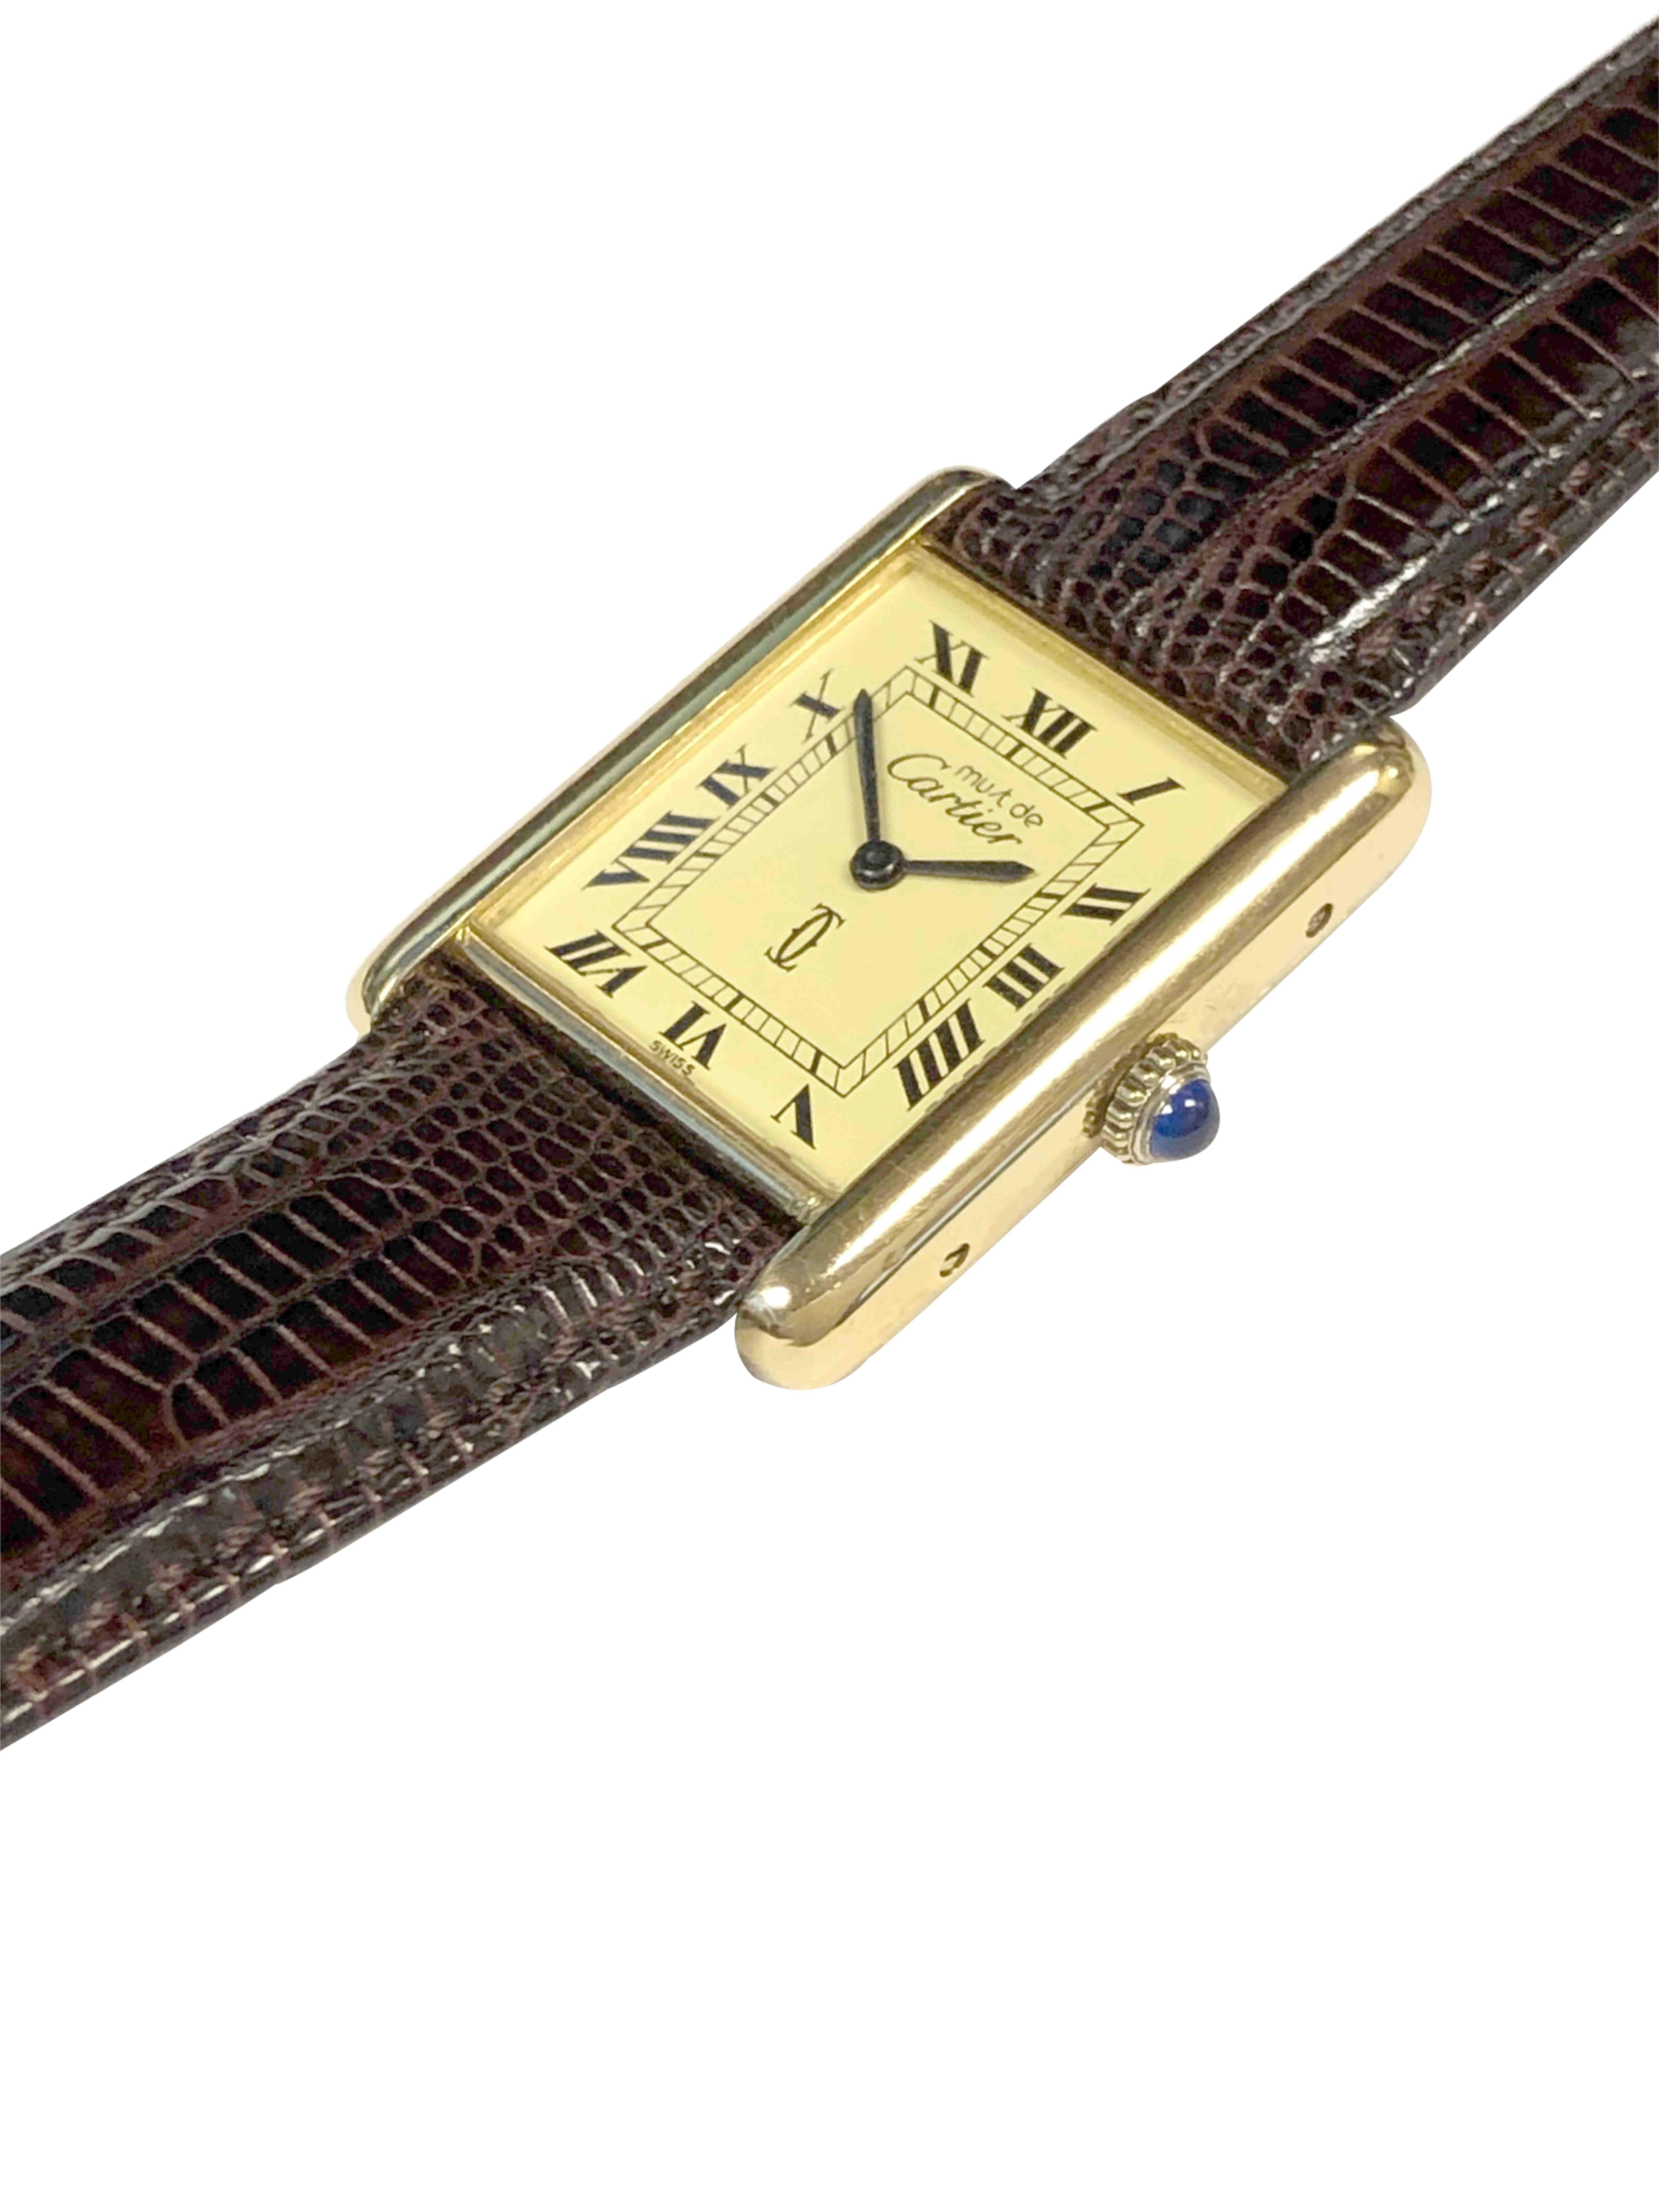 Circa 2000 Cartier Classic Tank Wrist Watch, 30 X 24 M.M. 2 Piece Vermeil ( Gold plate on Sterling Silver ) case. Mechanical Movement, Sapphire Crown, Cream Dial with Black Roman Numerals. New Brown Lizard strap with original Cartier Gold Plate Tang